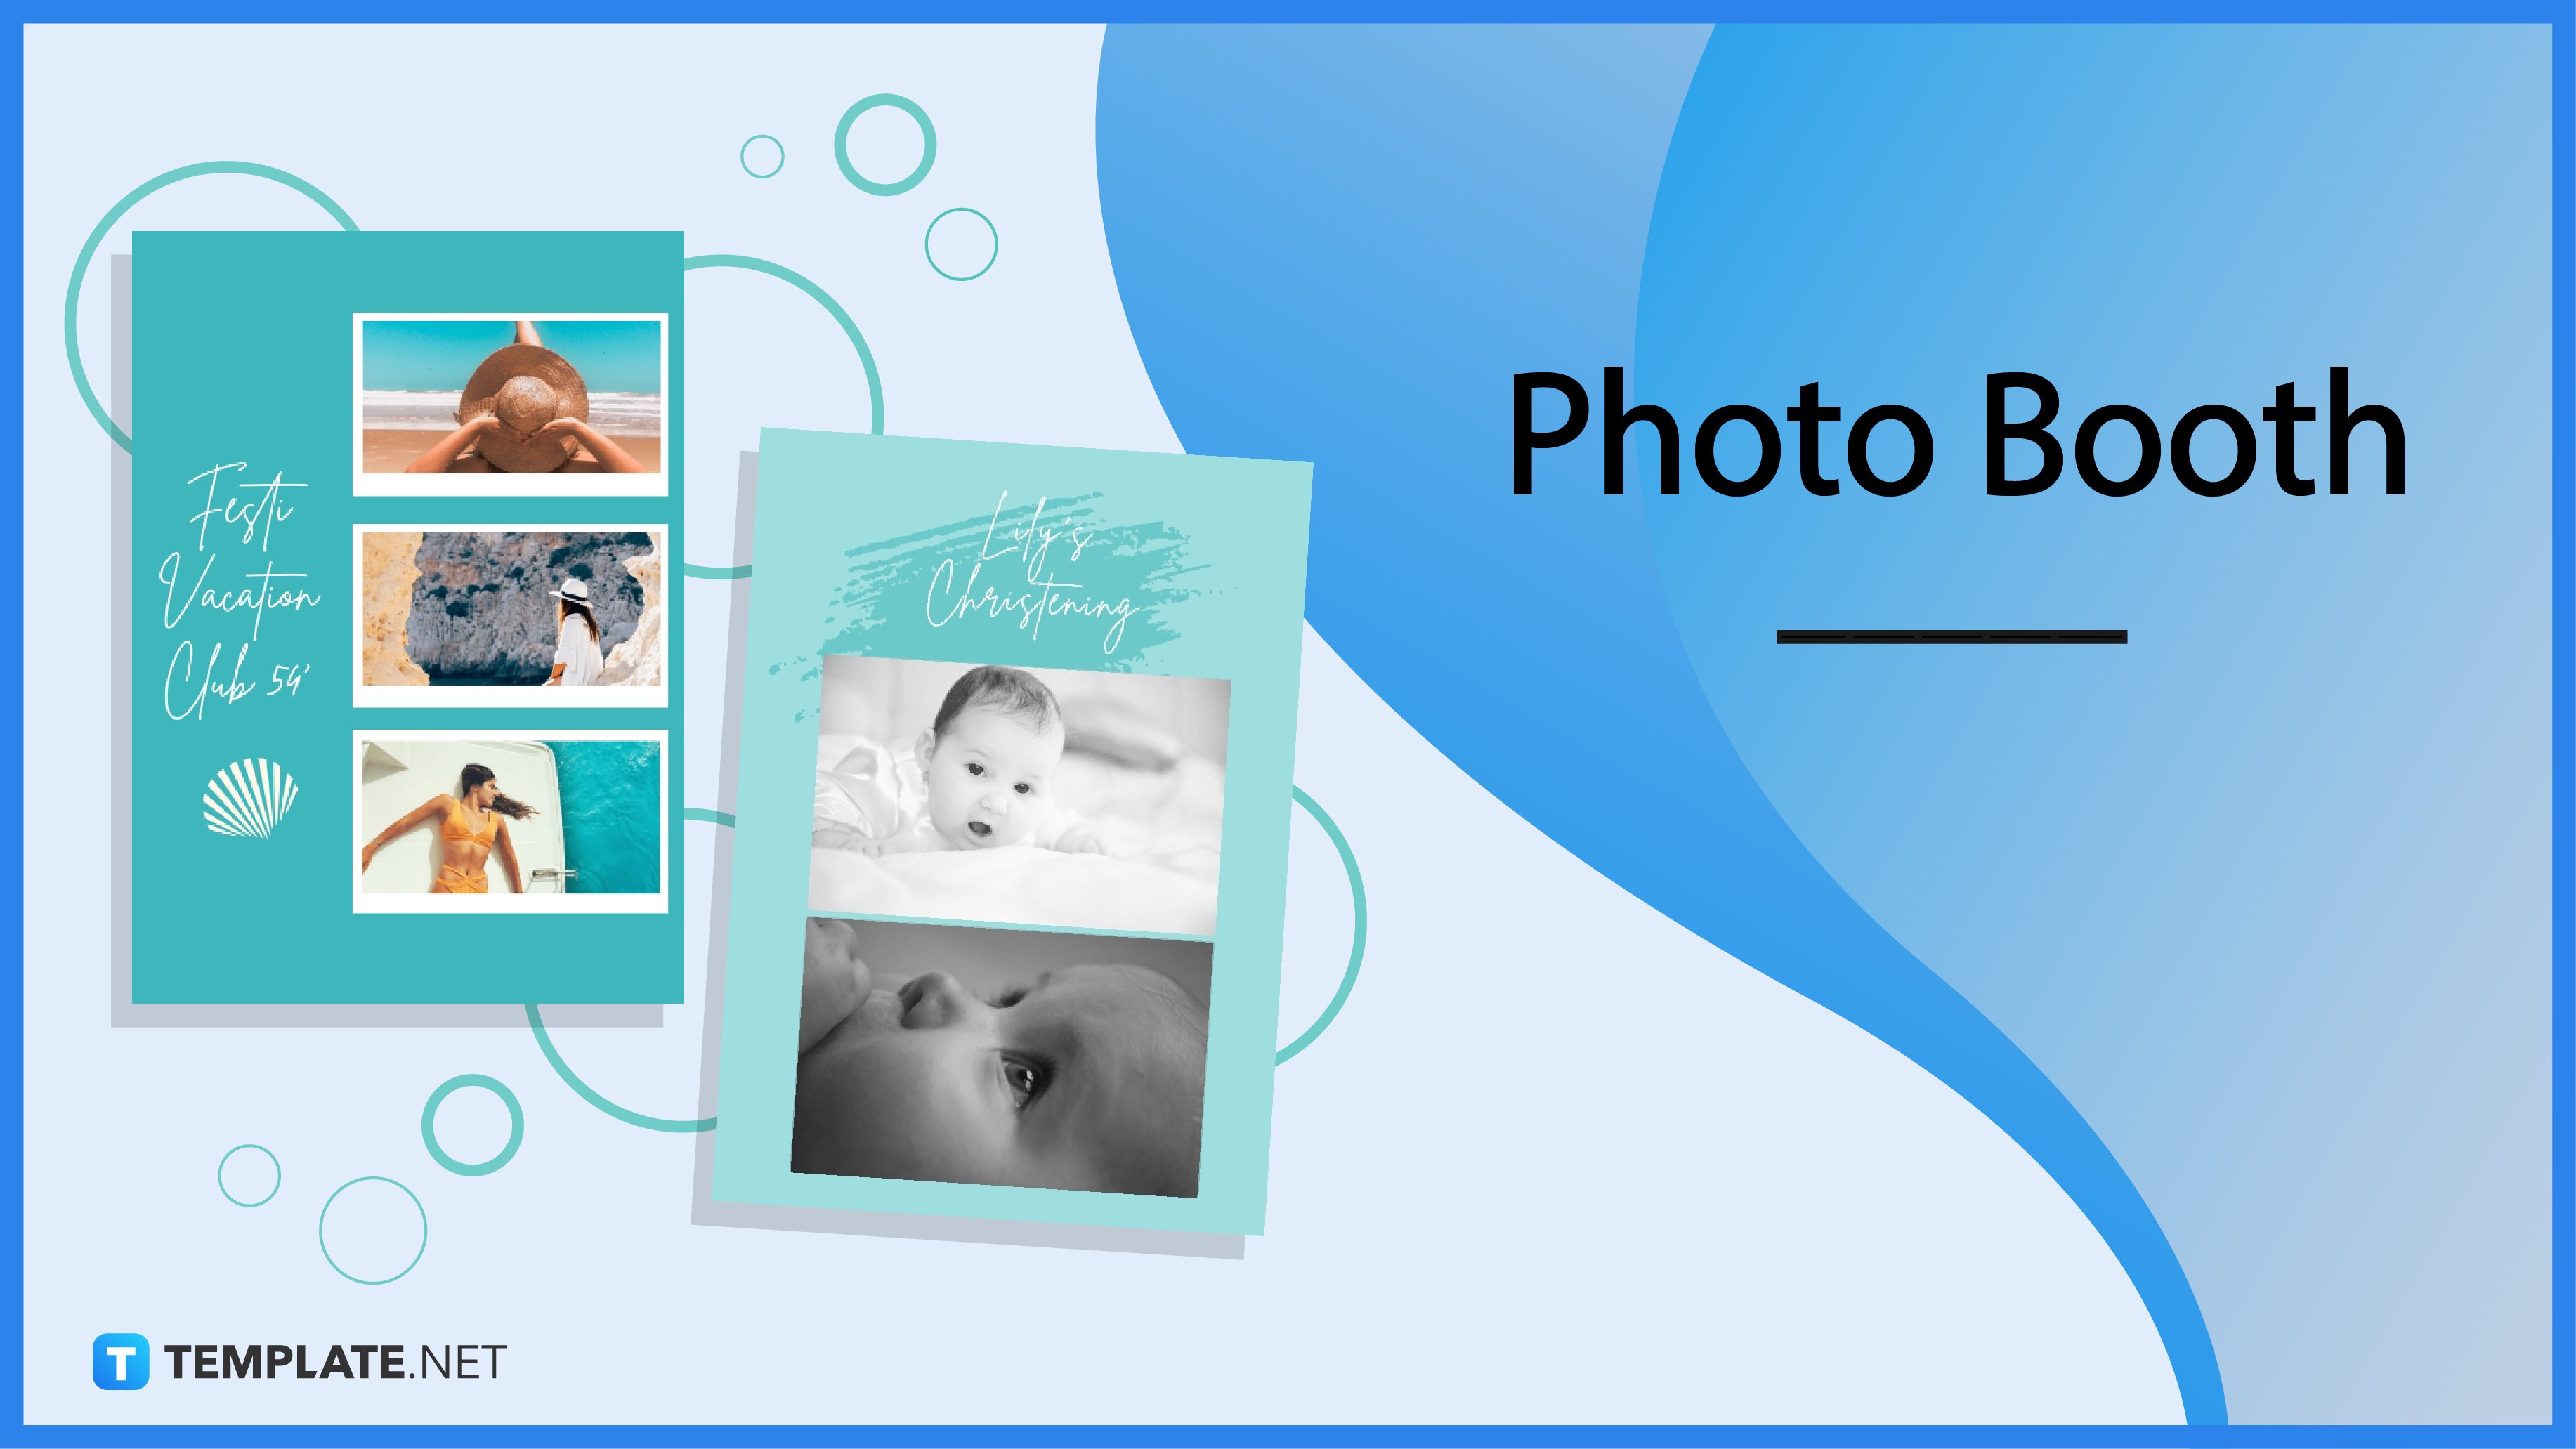 Introducing our new Photo booth Album